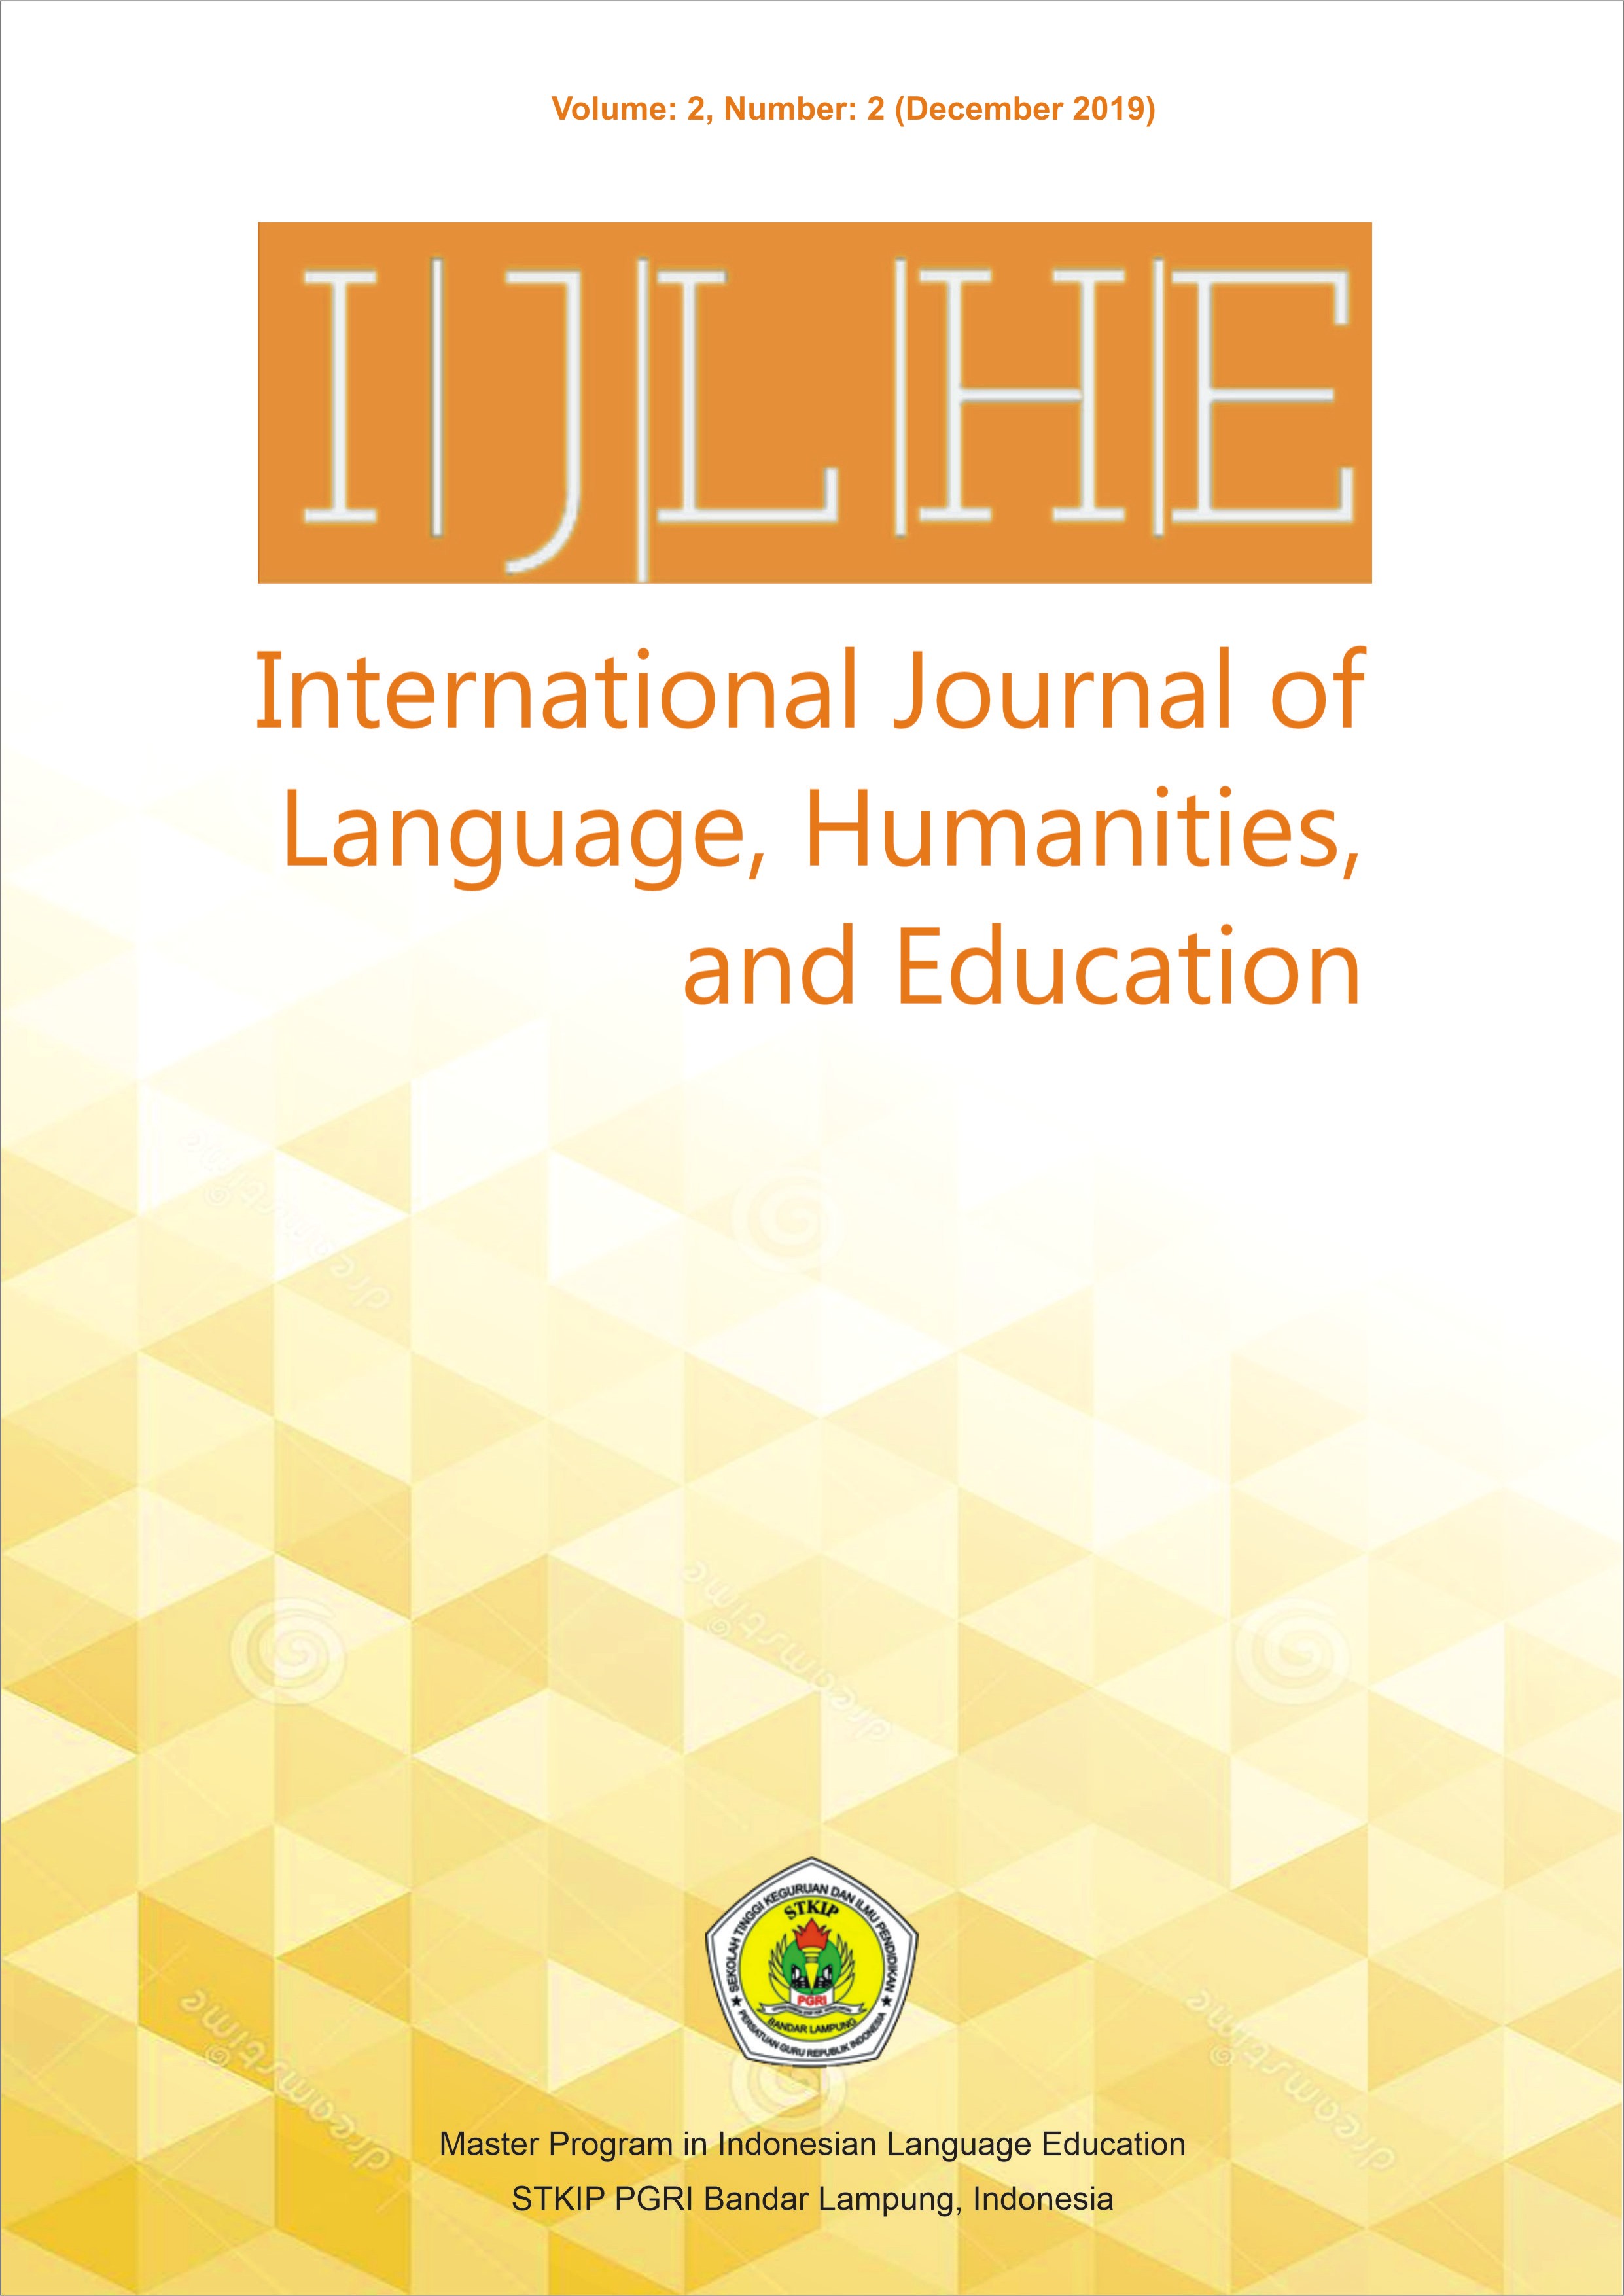 					View Vol. 2 No. 2 (2019): IJLHE: International Journal of Language, Humanities, and Education
				